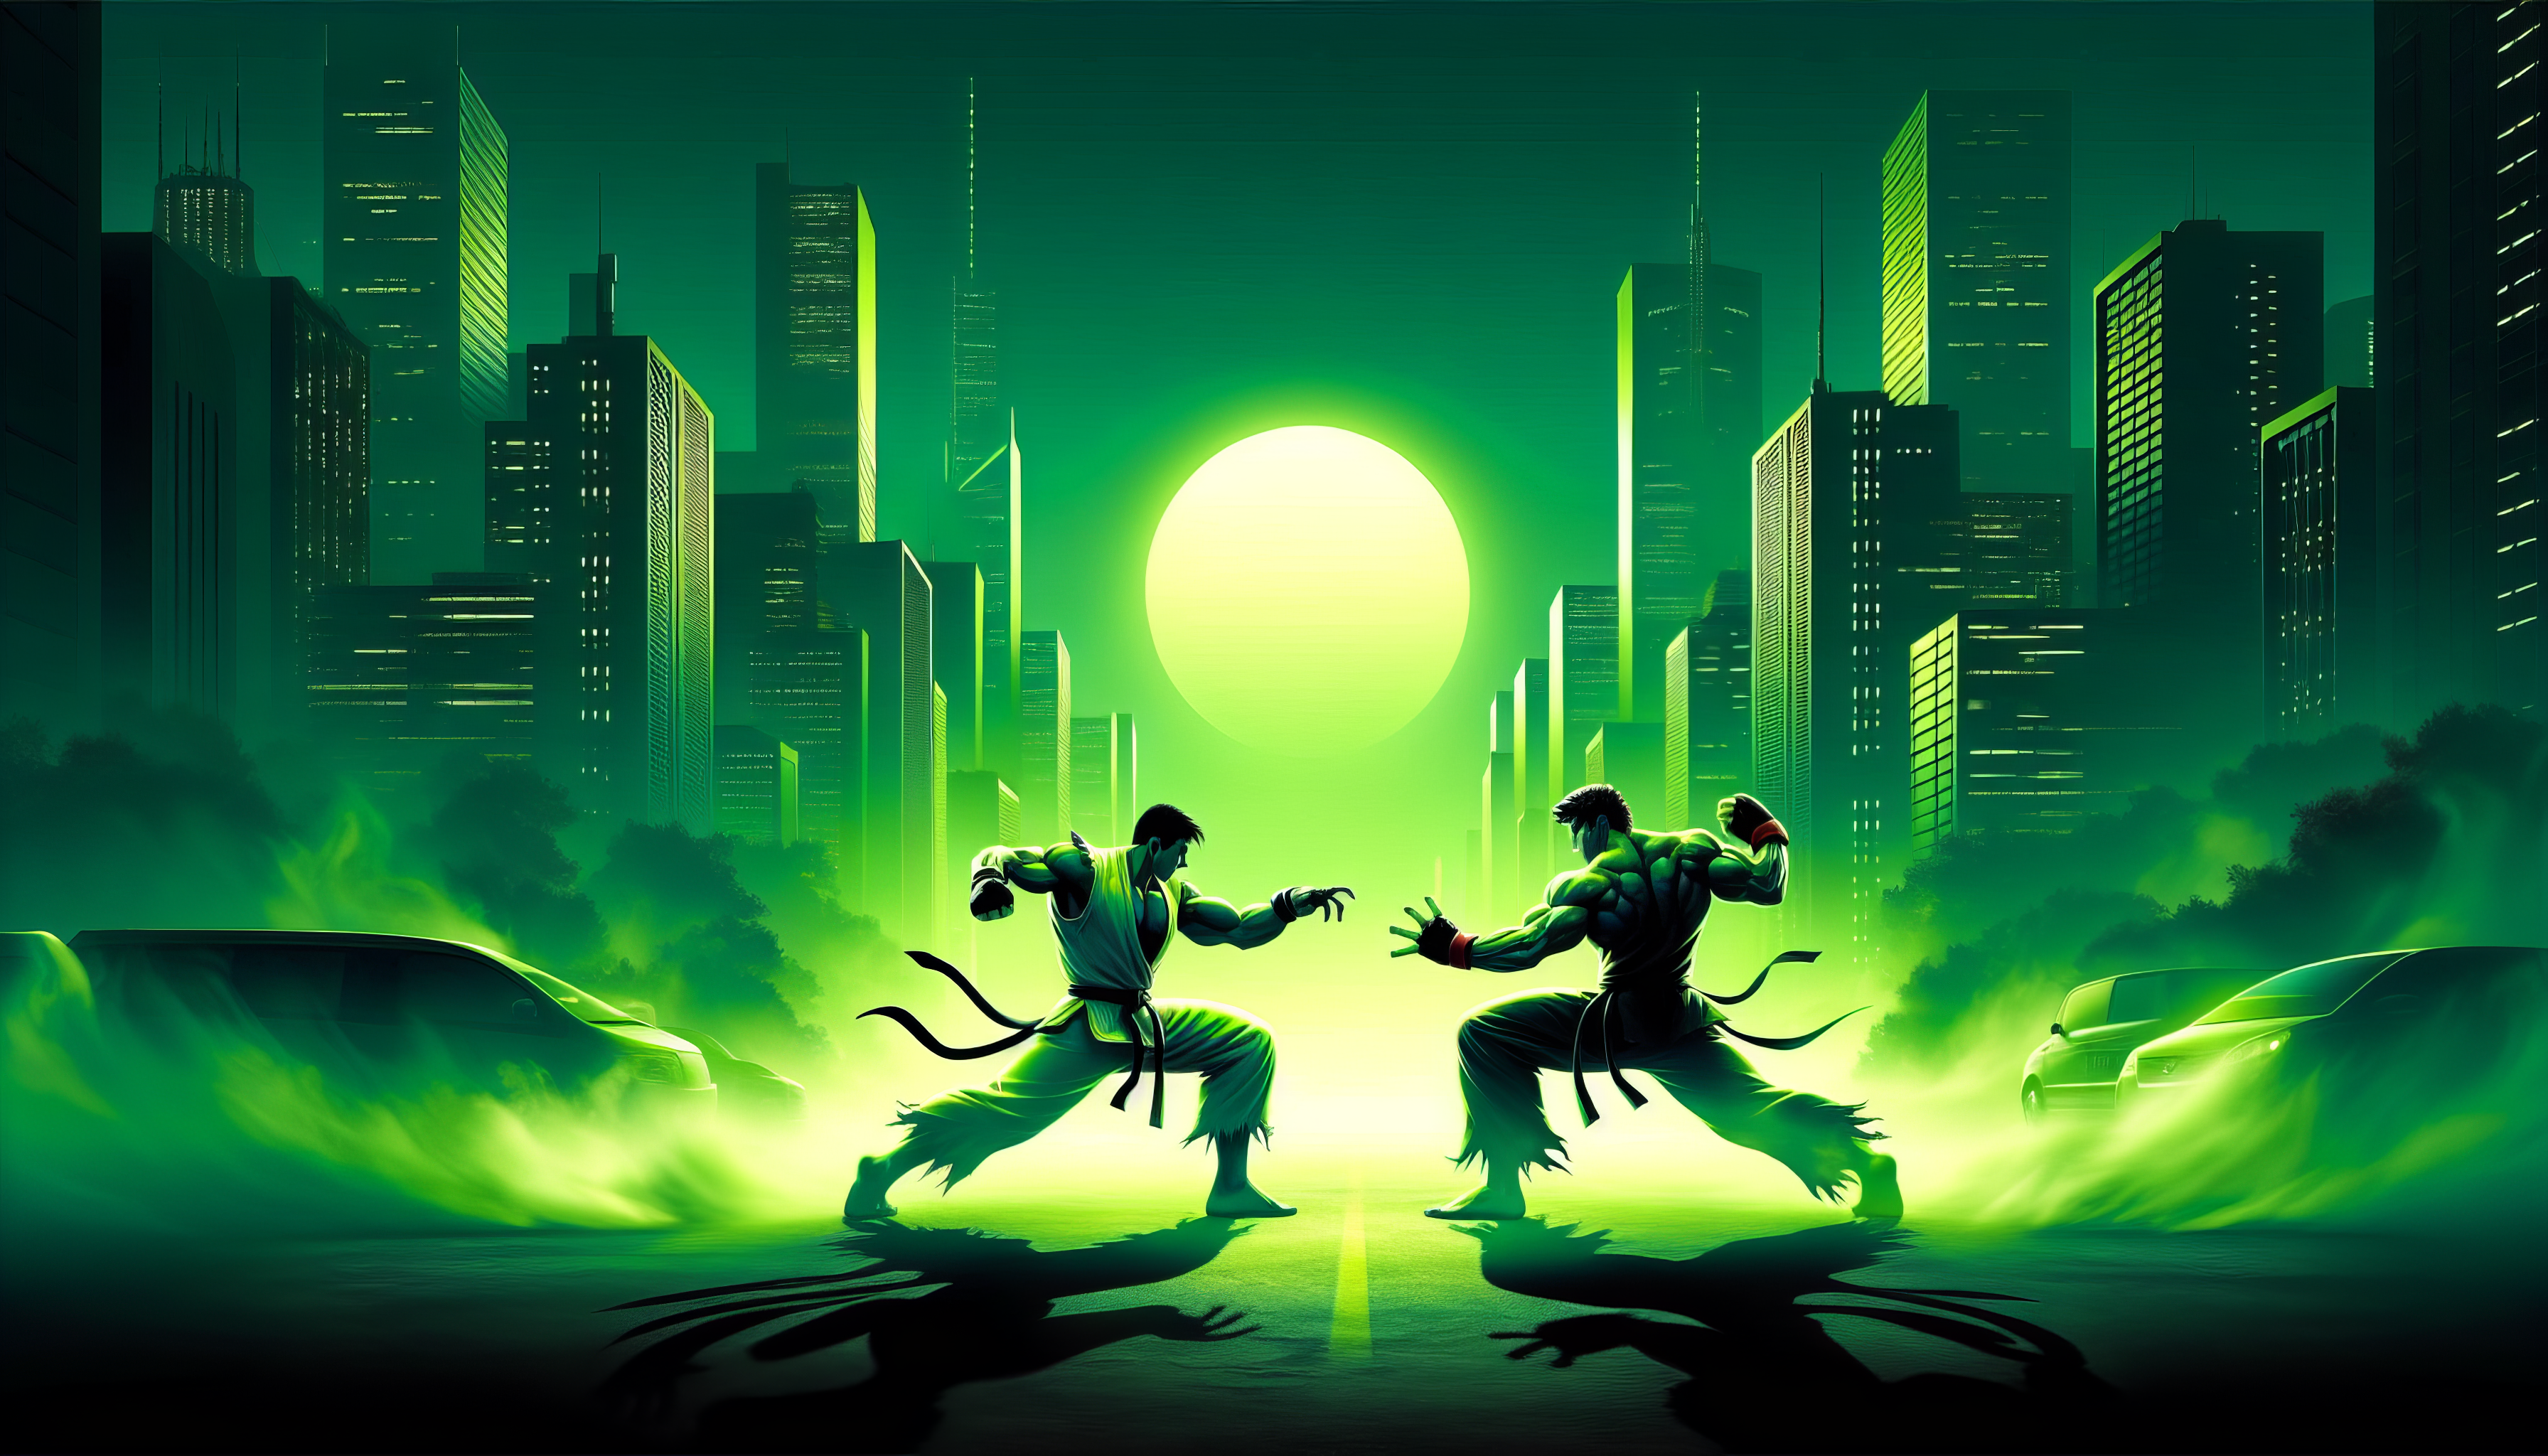 HD Street Fighter themed desktop wallpaper featuring iconic characters in a dynamic battle stance with a vivid green and yellow backdrop and a stylized city silhouette.